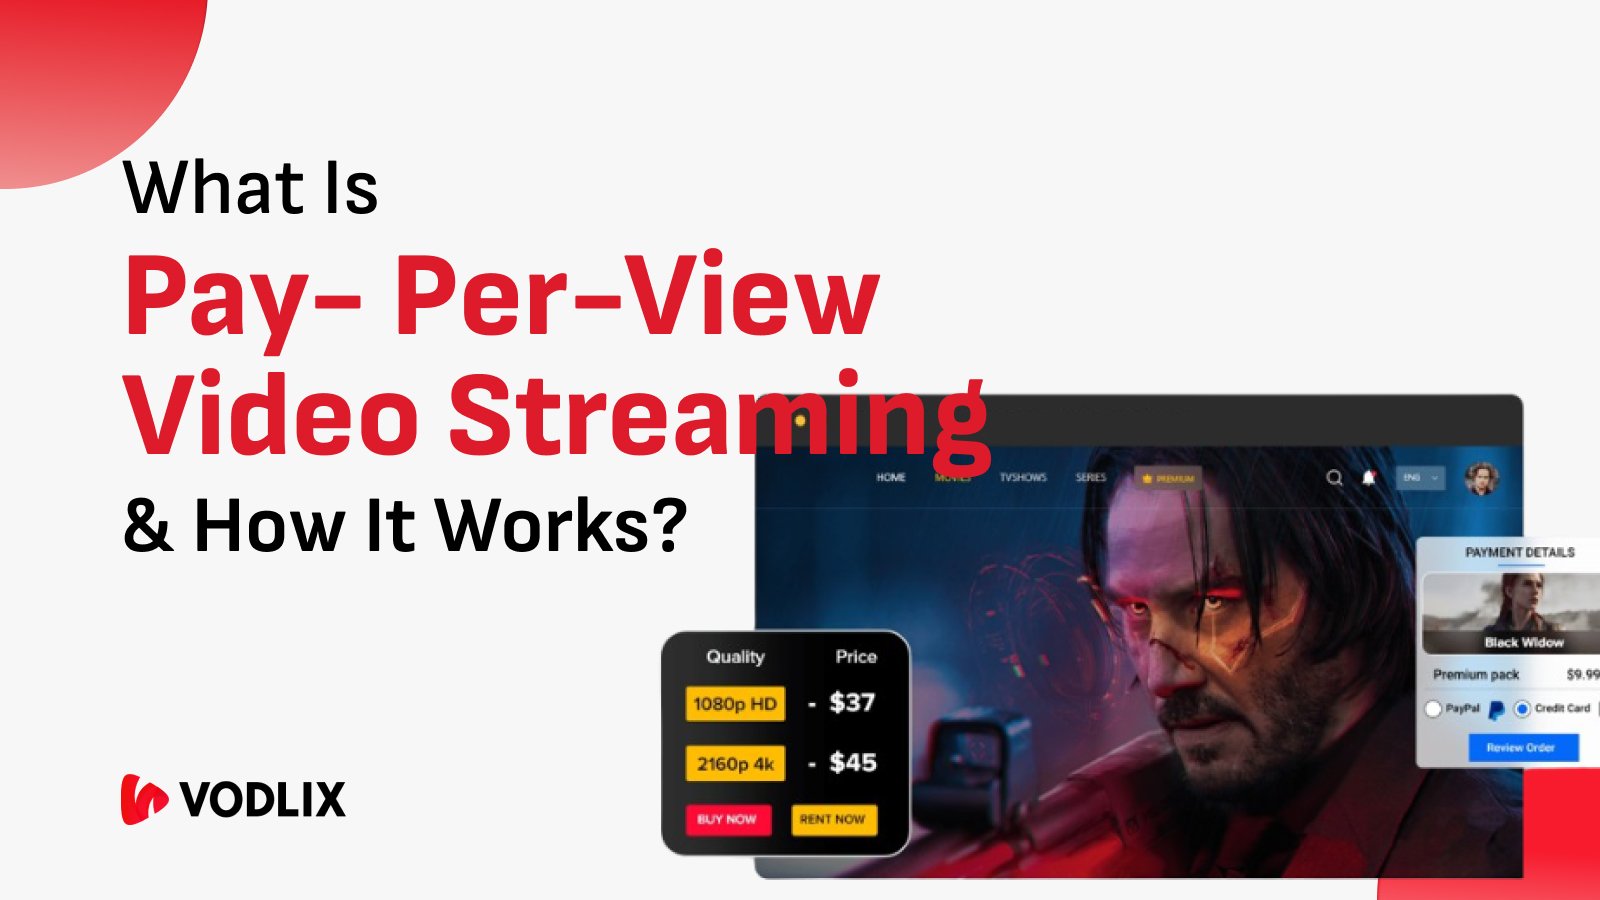 Pay-Per-View Video Streaming